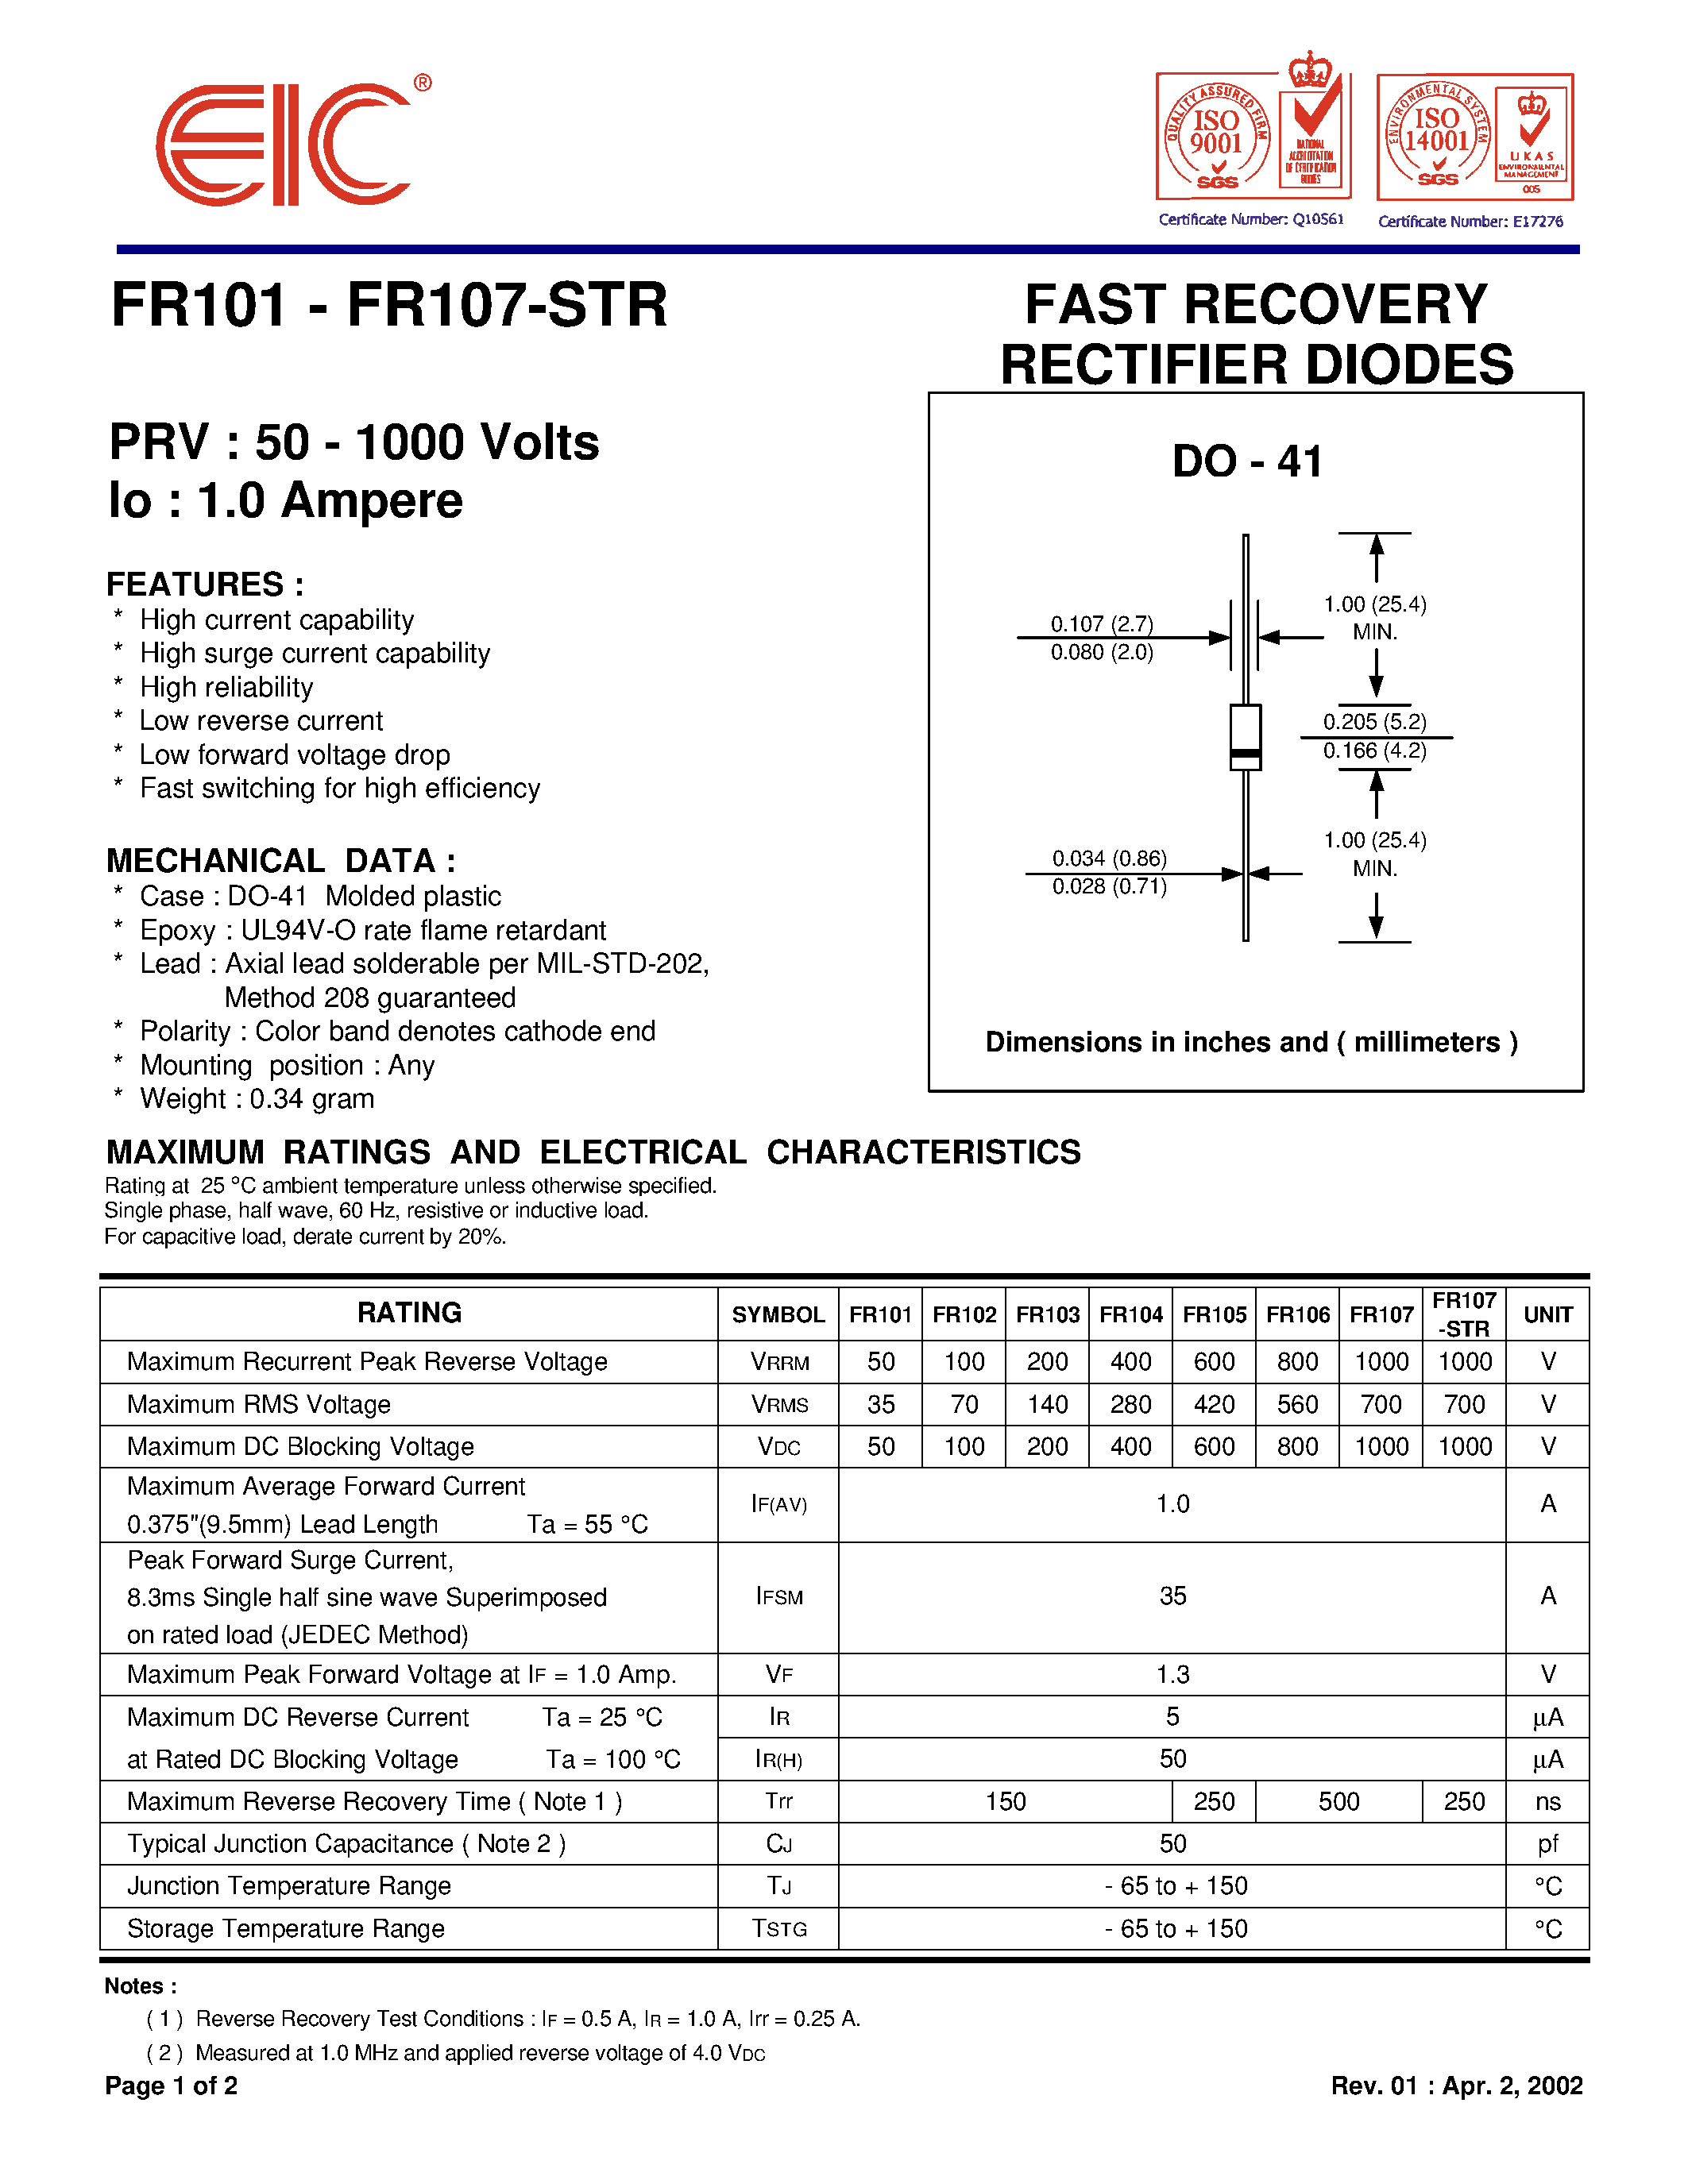 Datasheet FR101 - FAST RECOVERY RECTIFIER DIODES page 1